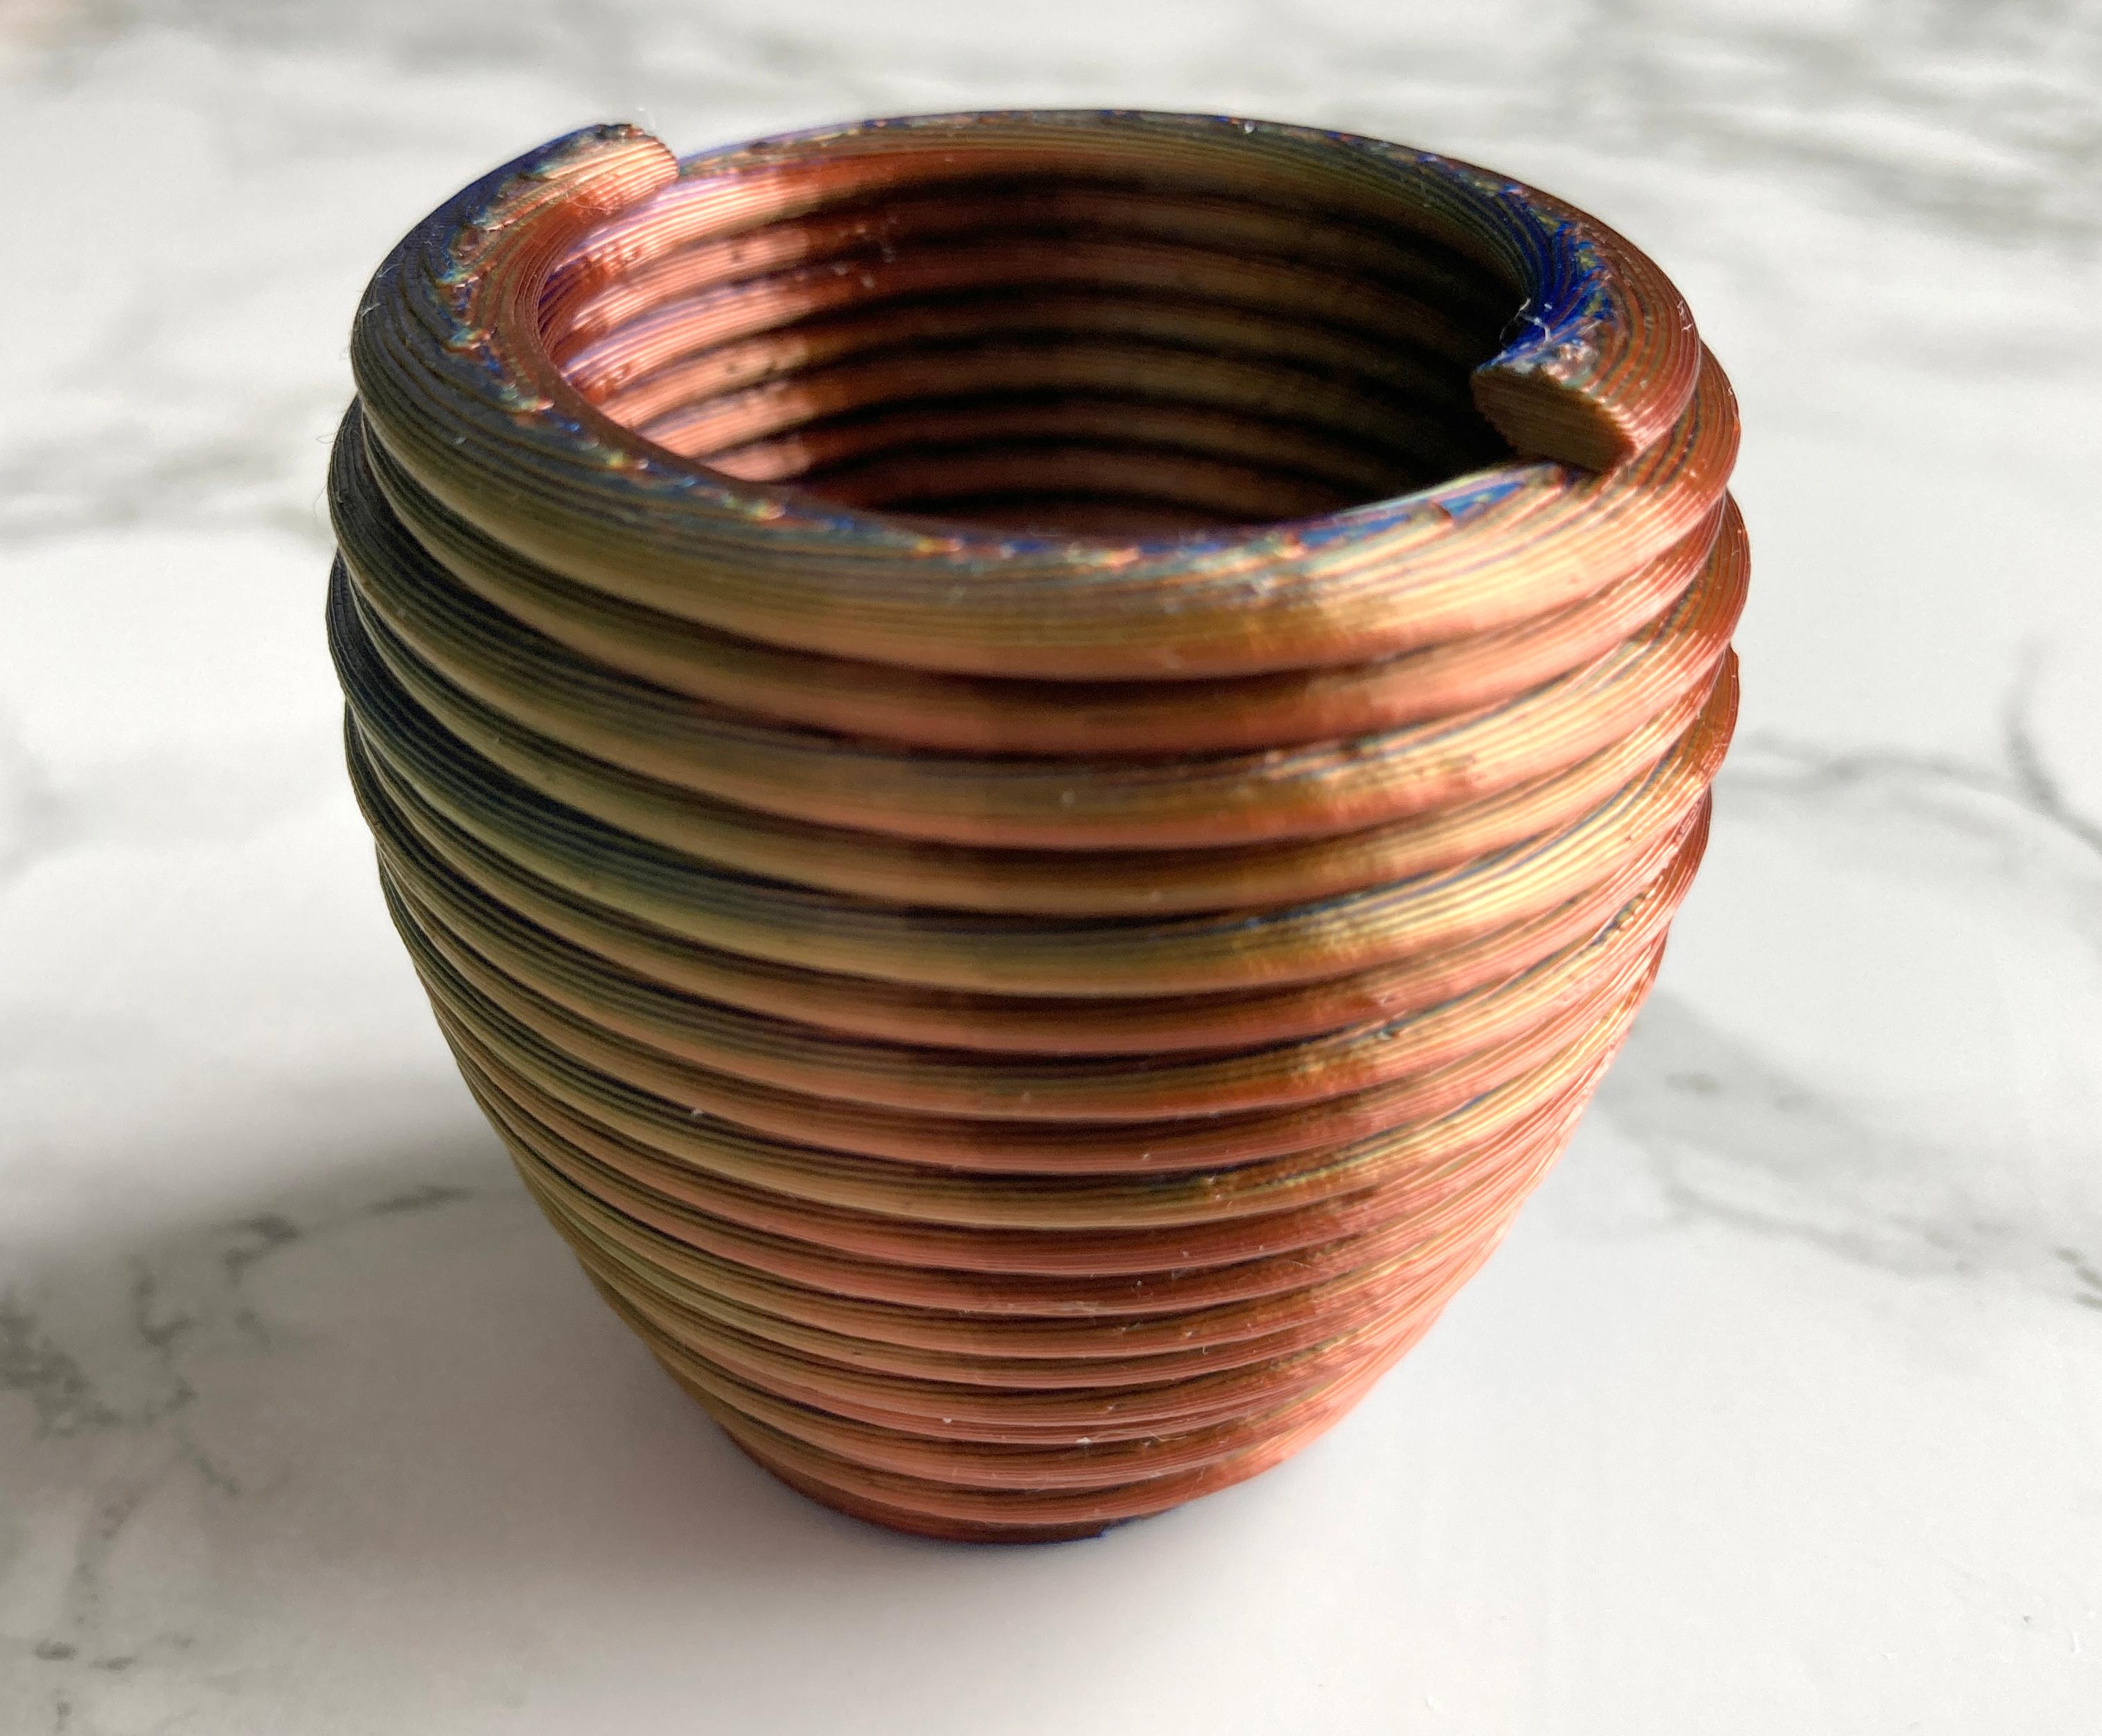 Coil Bowl - Such a fun looking model, had to try it with my Copper-Gold-Blue tri-colored filament! - 3d model